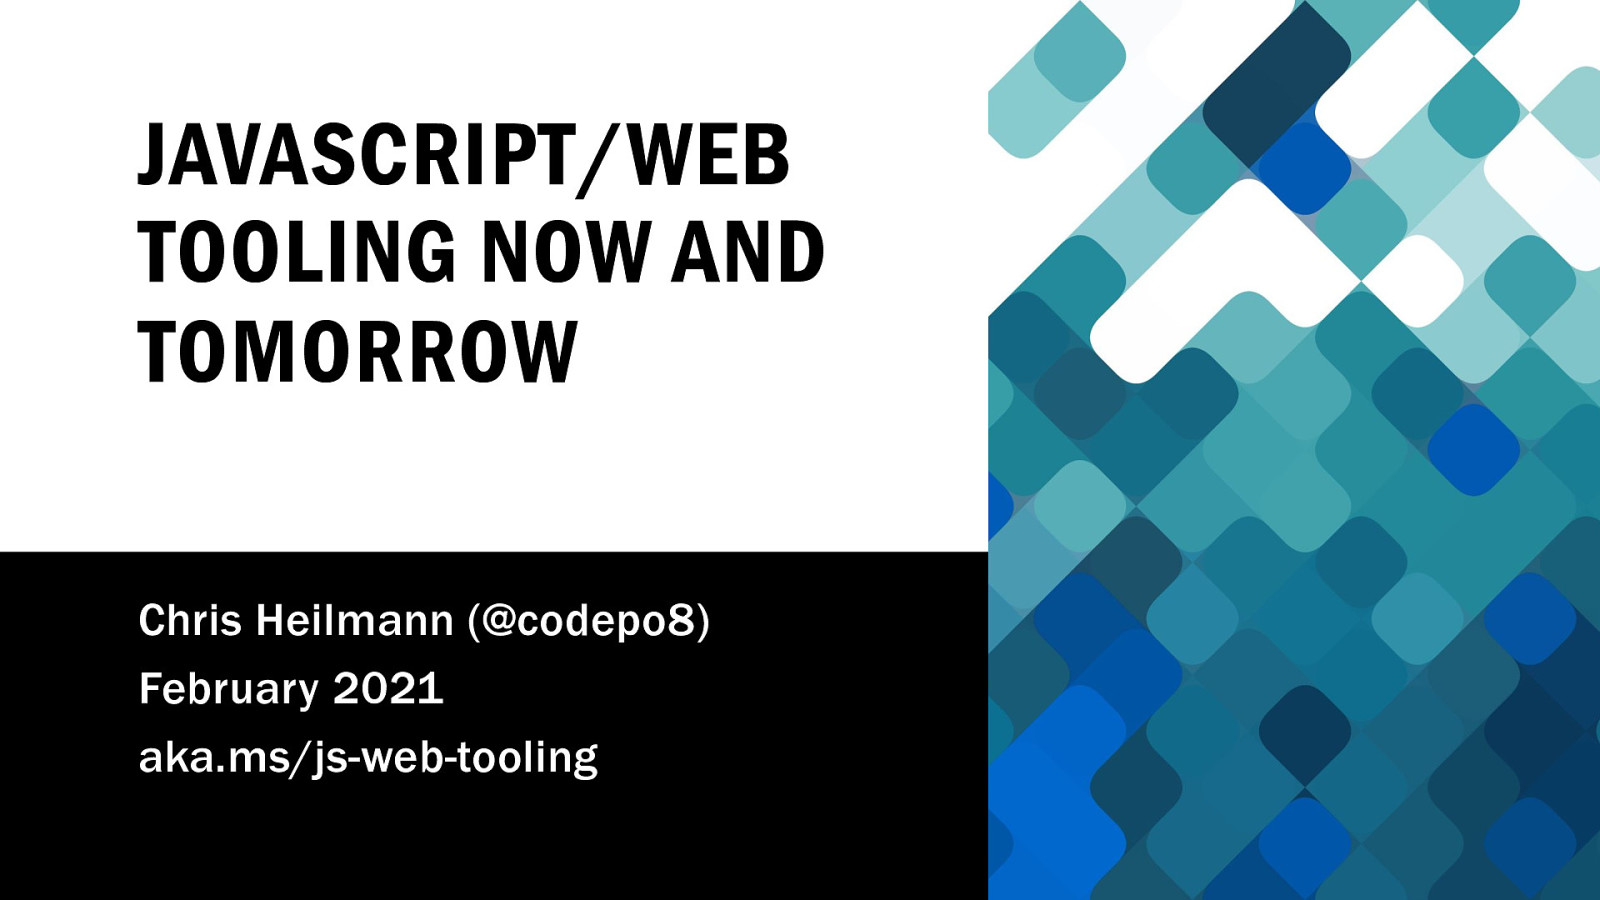 JavaScript/Web tooling now and tomorrow 